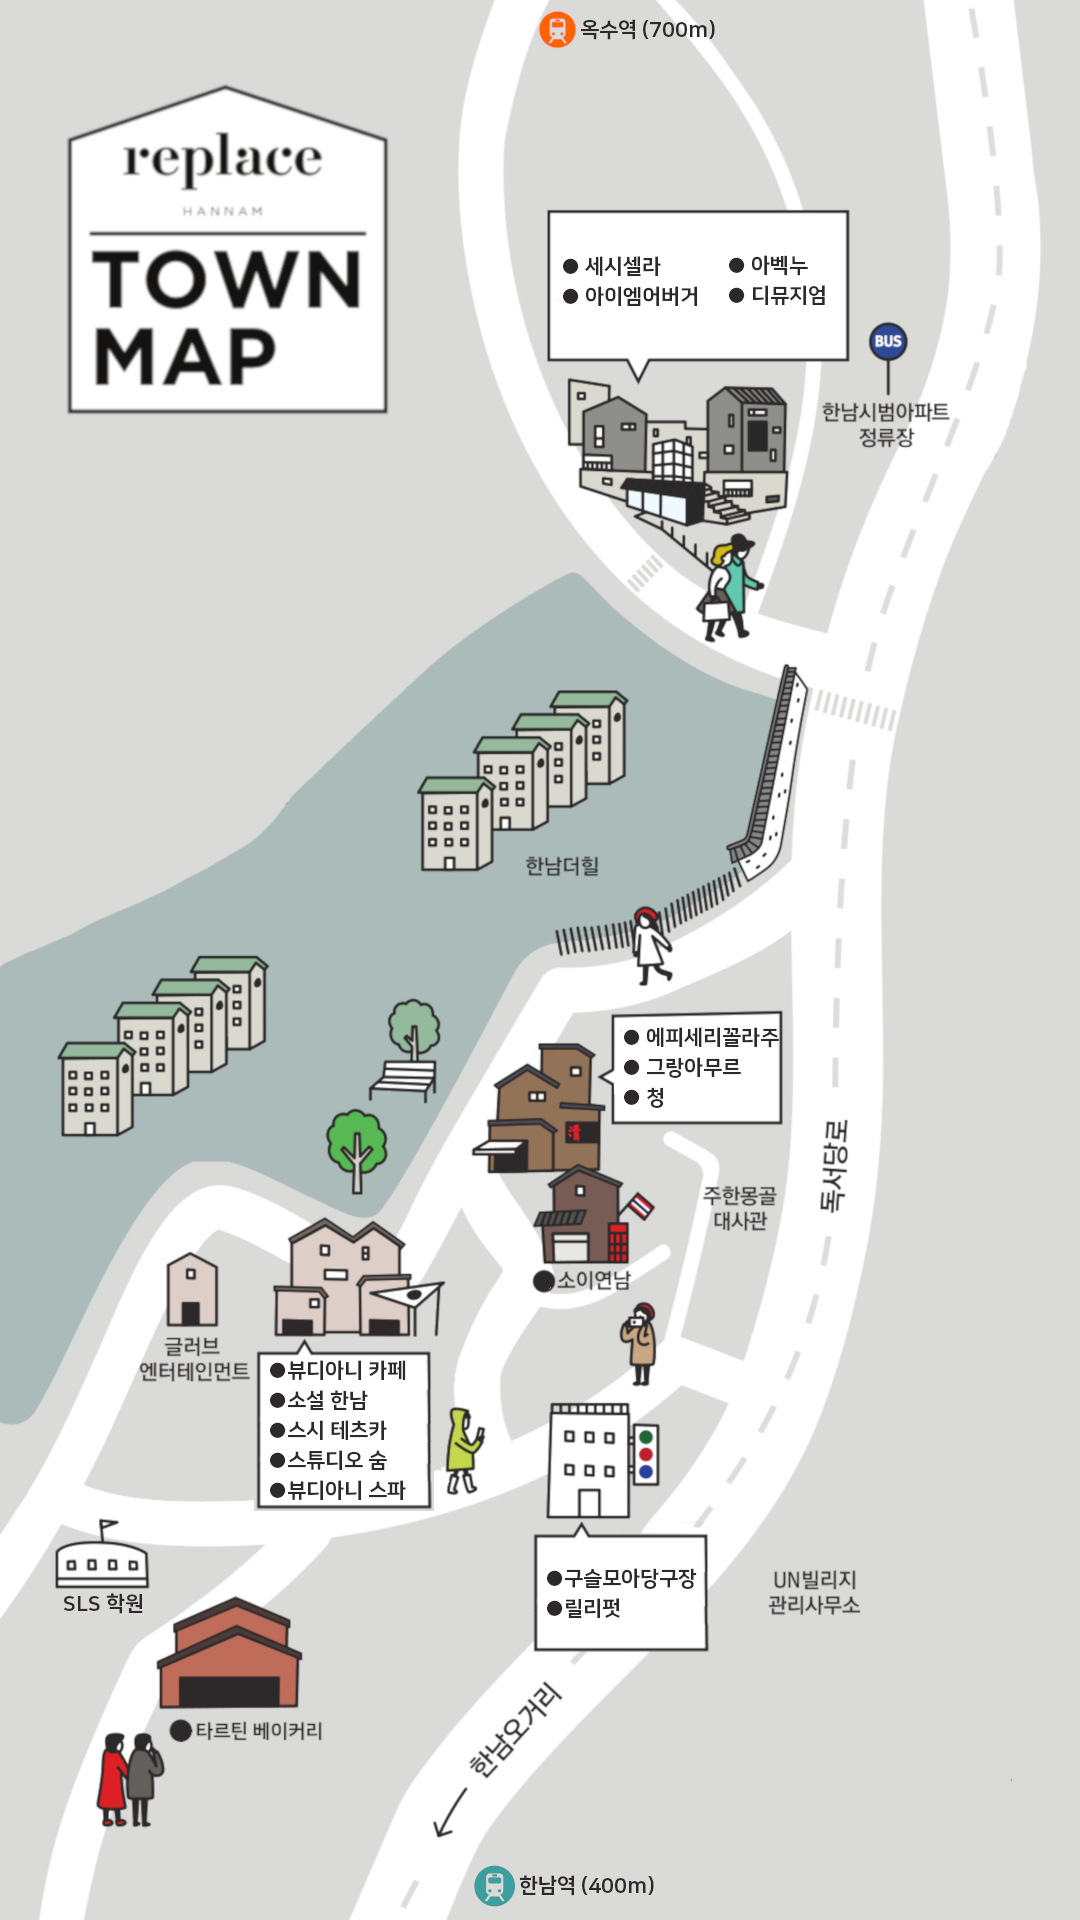 replace 한남 TOWN MAP